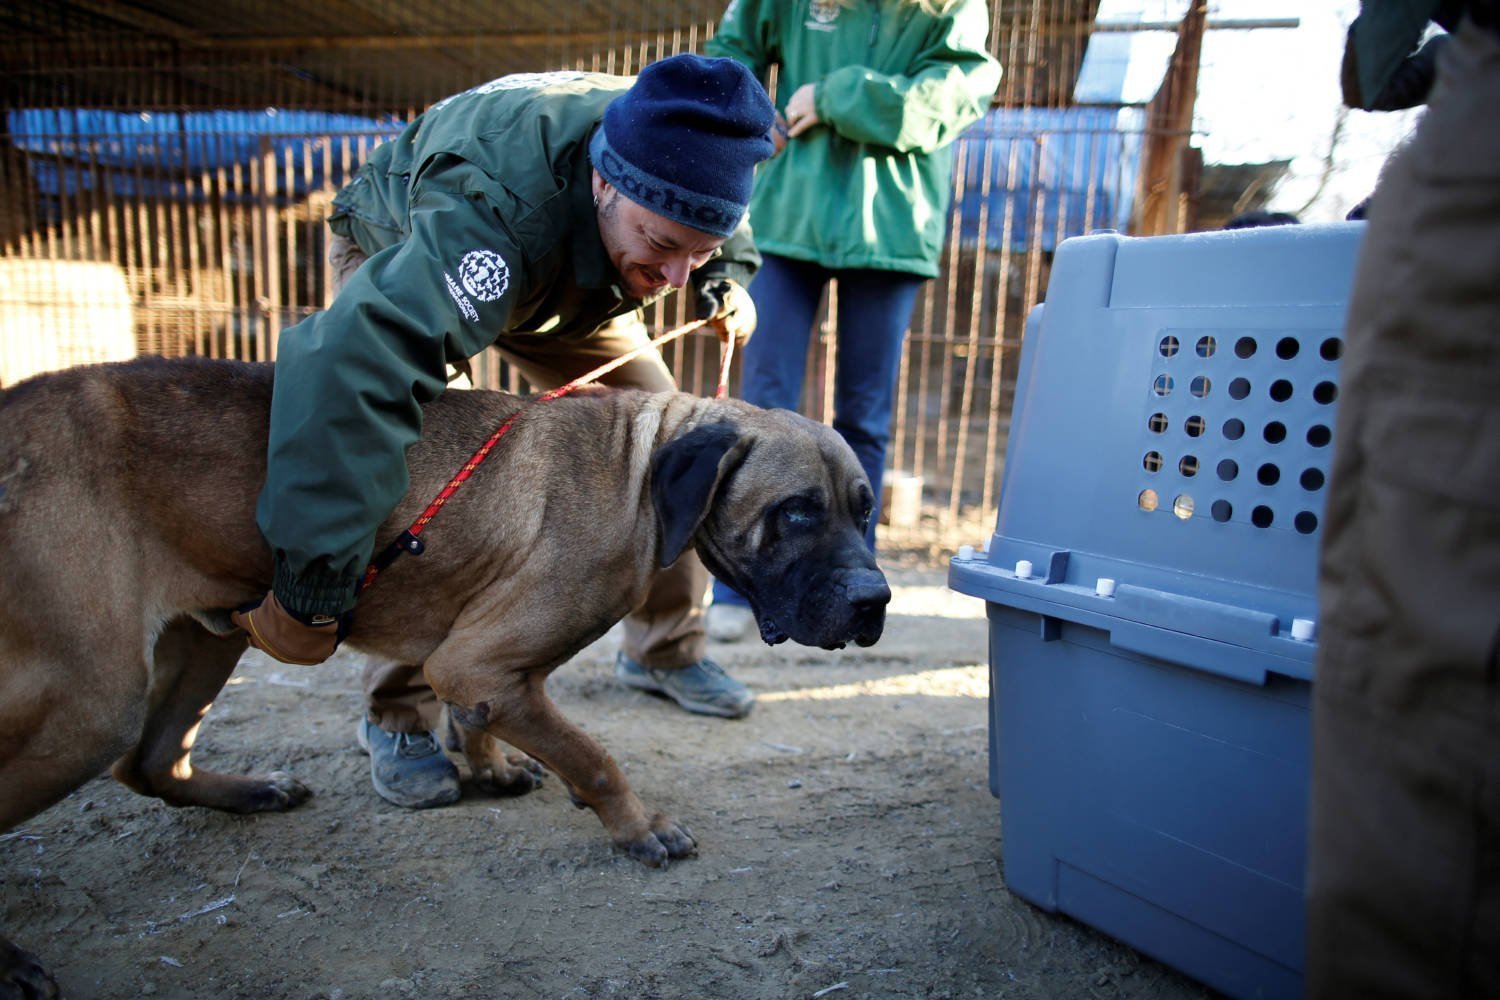 File Photo: South Korea Aims To Ban Eating Dogs